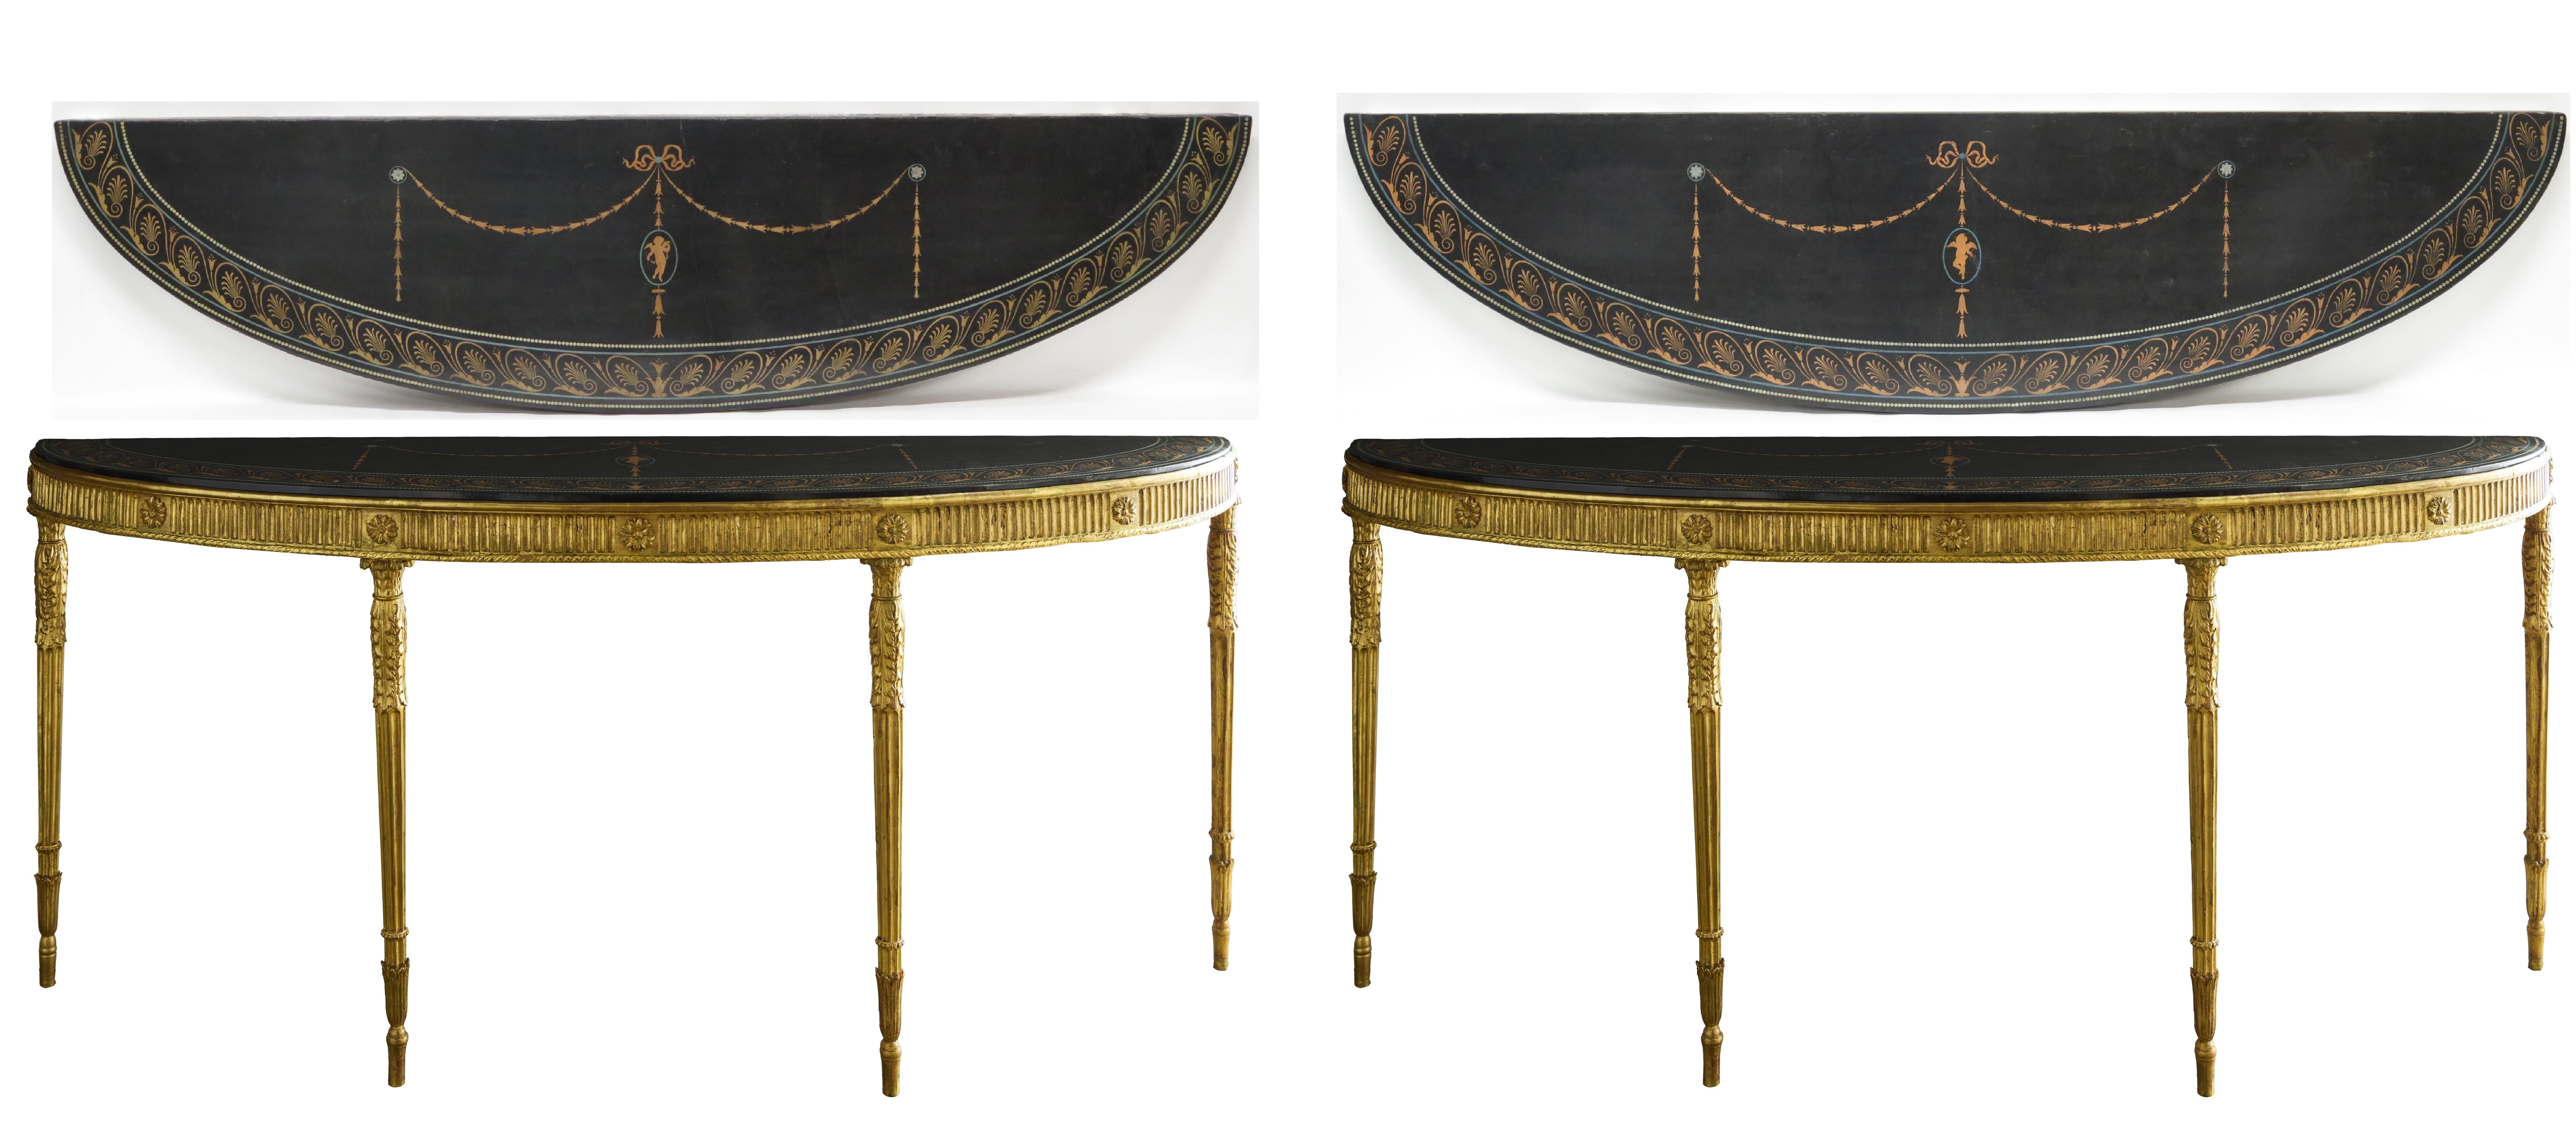 a pair of George III Adam-style giltwood and scagliola demilune console tables, the giltwood bases, England, late 18th century, scagliola tops maybe later, Grand Tour souvenir, Italy, 19th century 